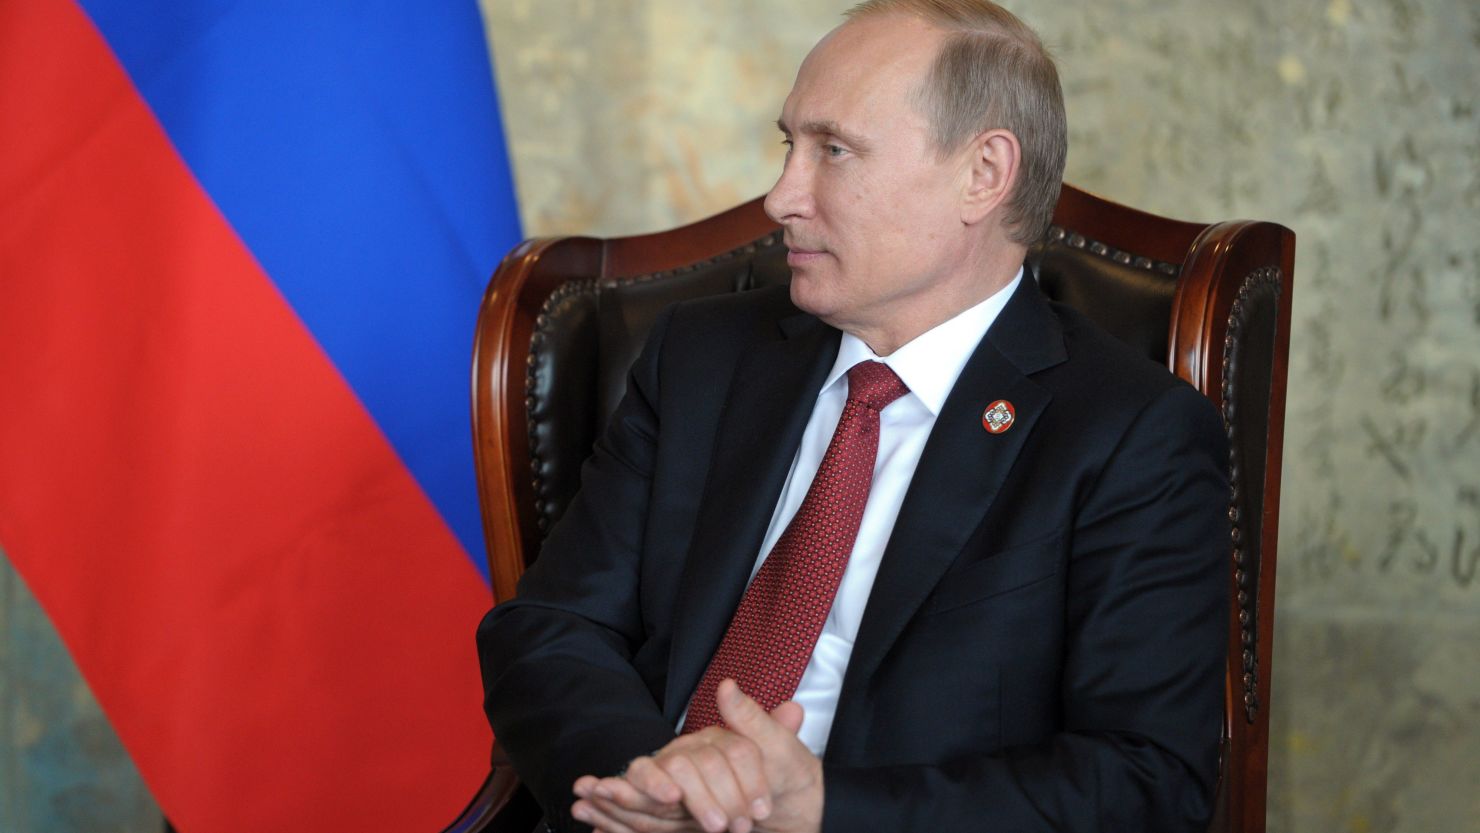 Russia's President Vladimir Putin attends a meeting on May 21, 2014.